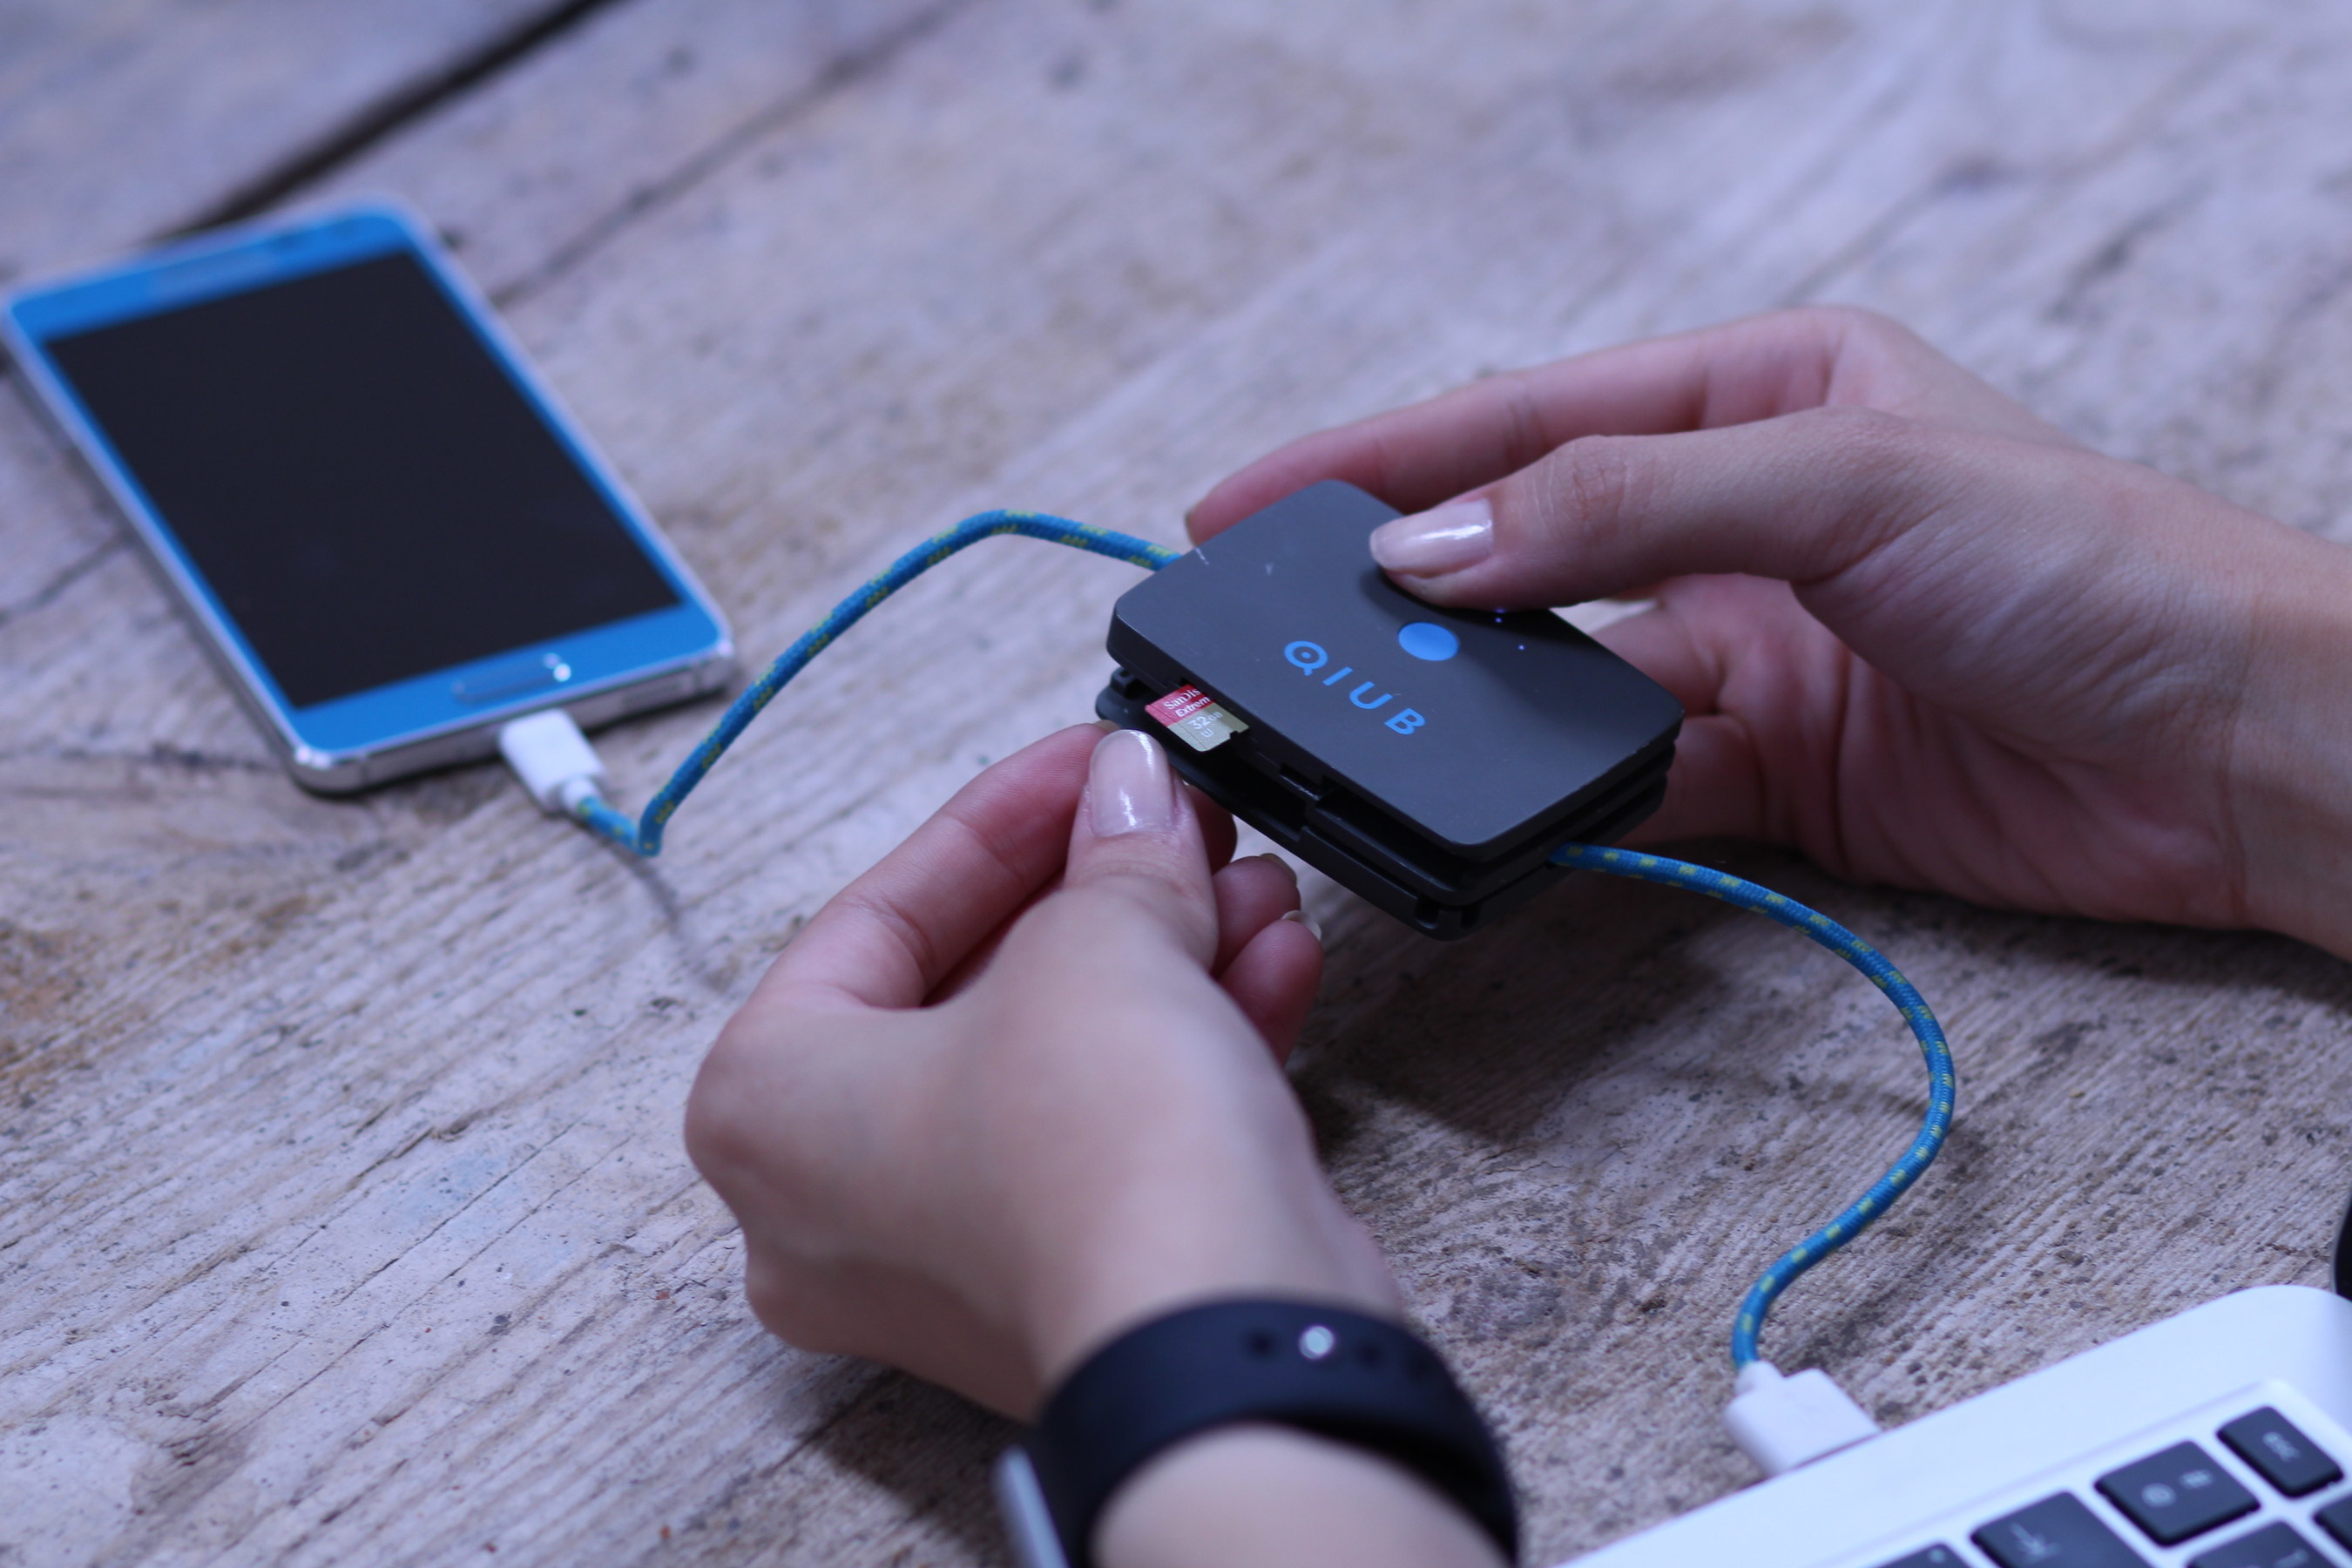 Simply plug your QIUB into your phone and power source to start charging your phone. When your smartphone is fully charged, QIUB will redirect the charge to its own internal battery.